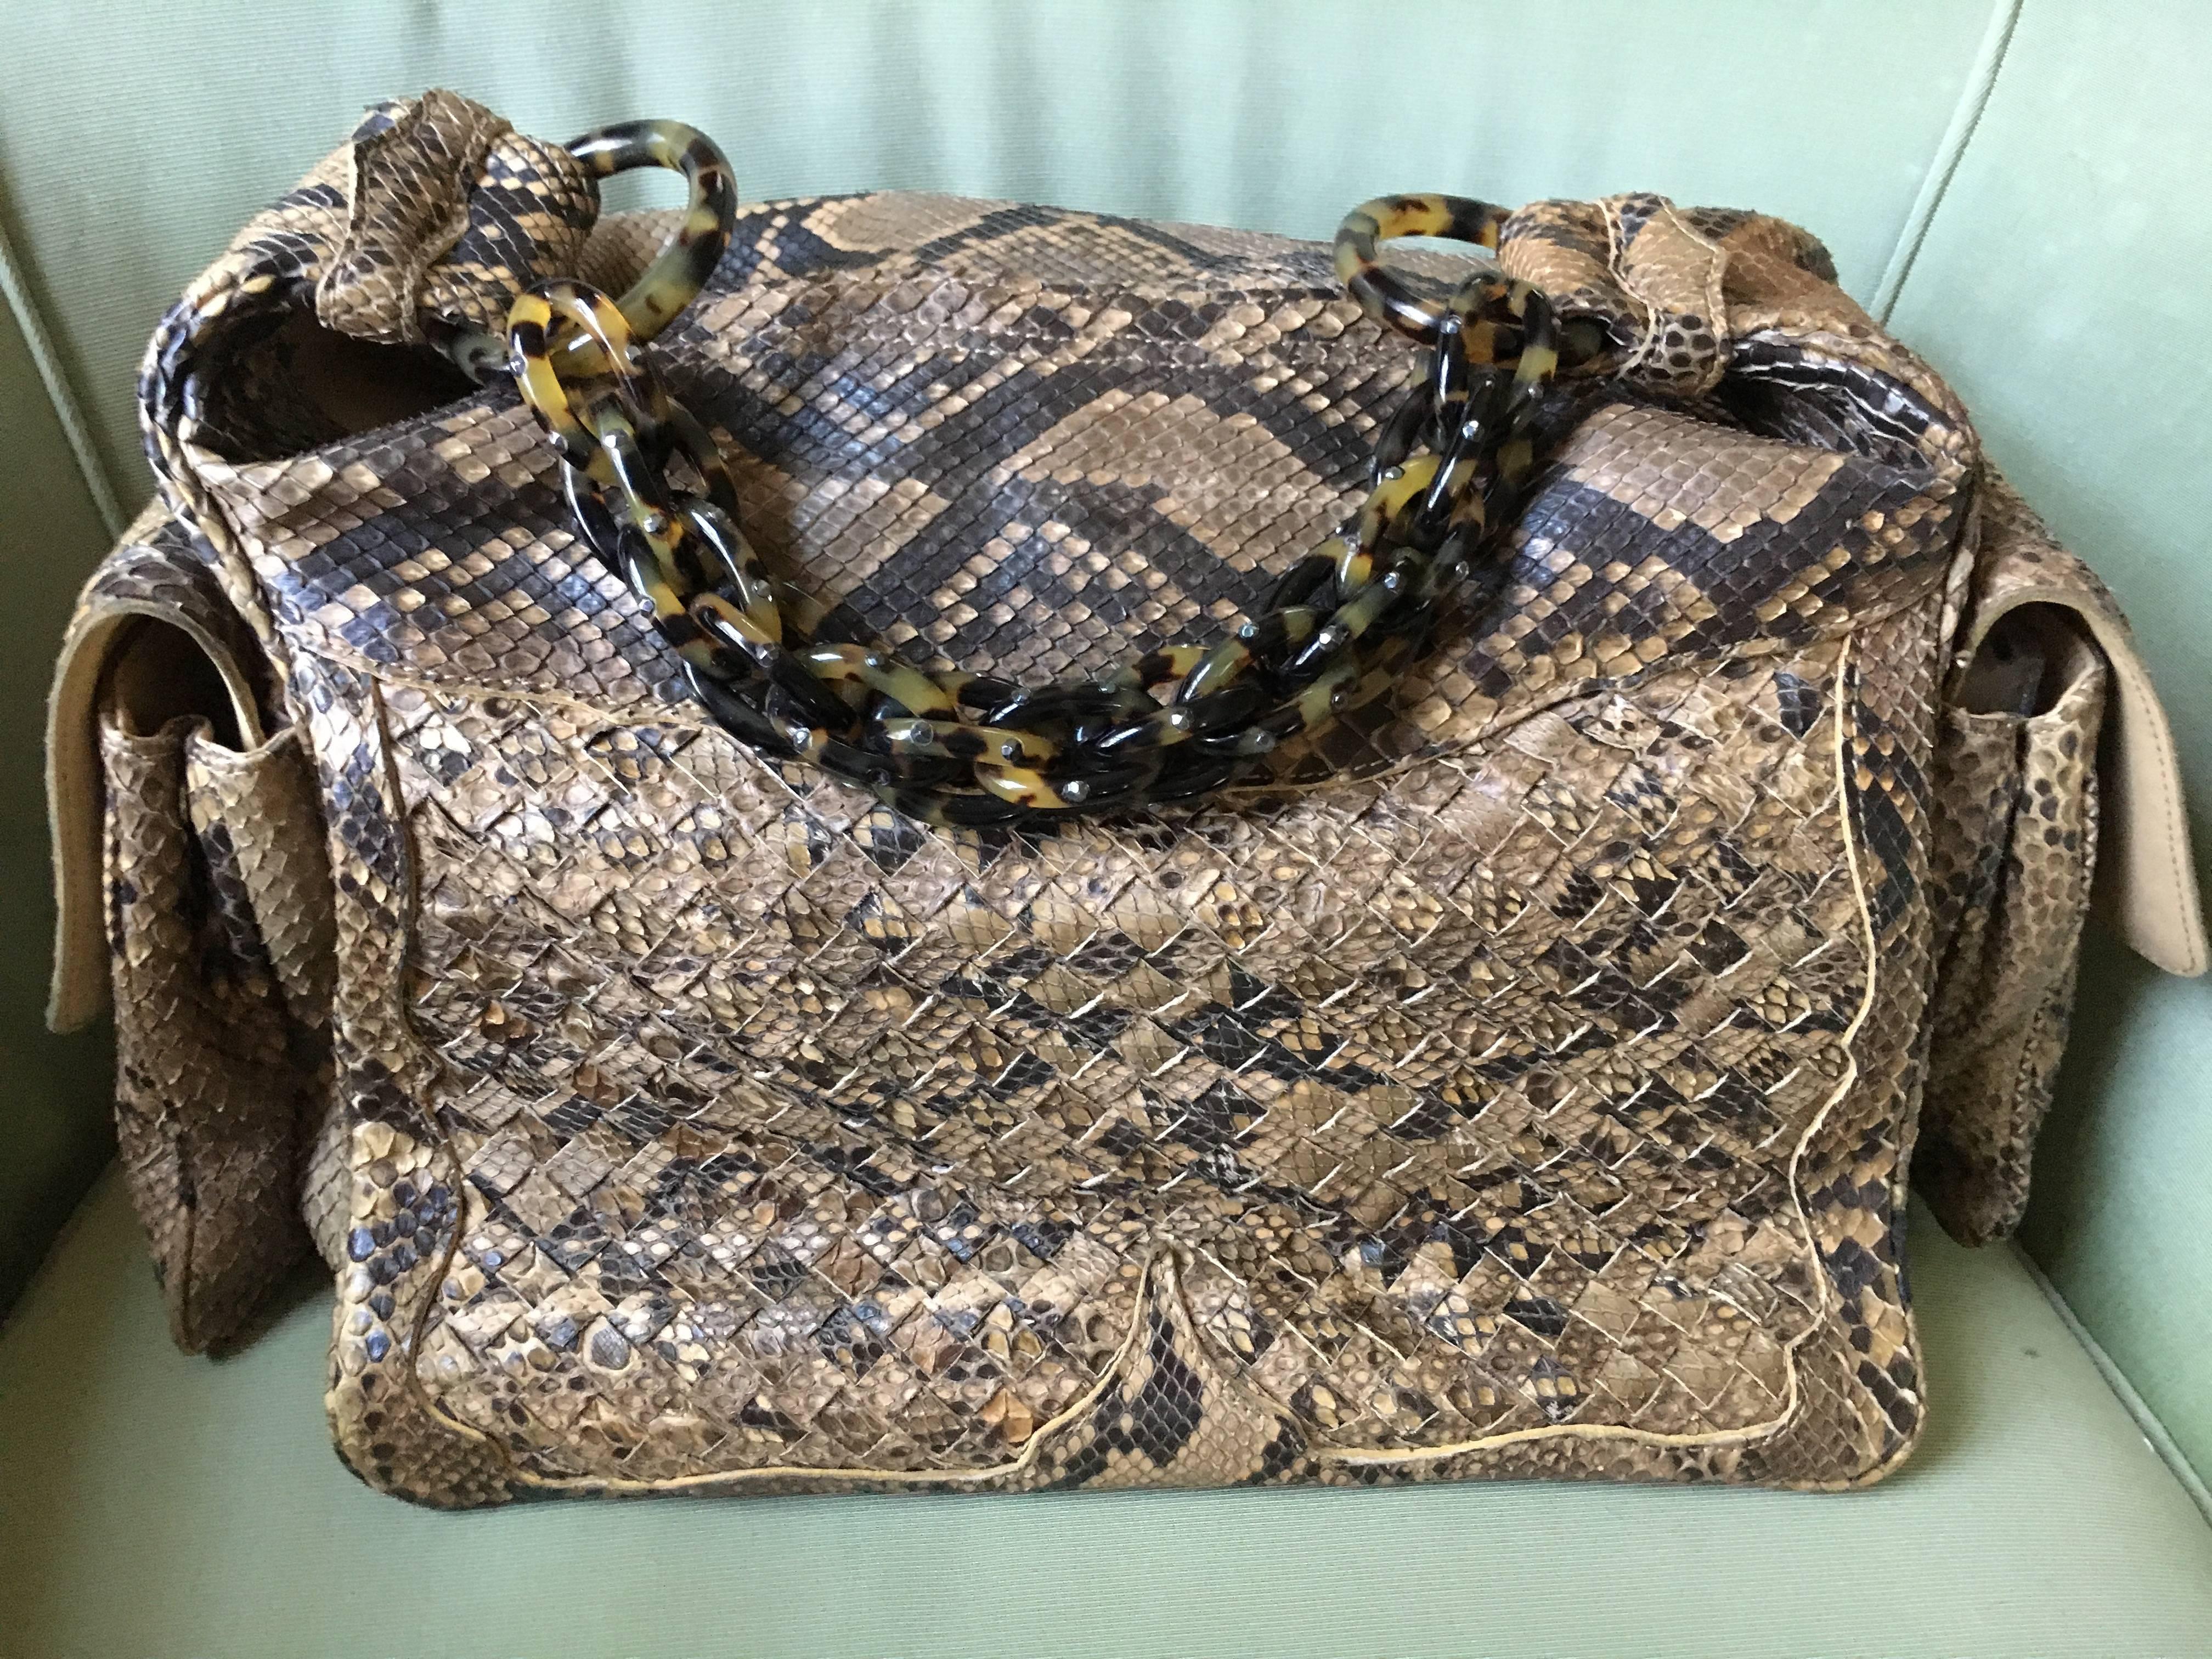 Bottega Veneta Rare Python Crocker Bag with Tortoise Chain Retail $5400.

This beauty is in neutral tones of python, with a suede interior and tortoise chain strap.

12